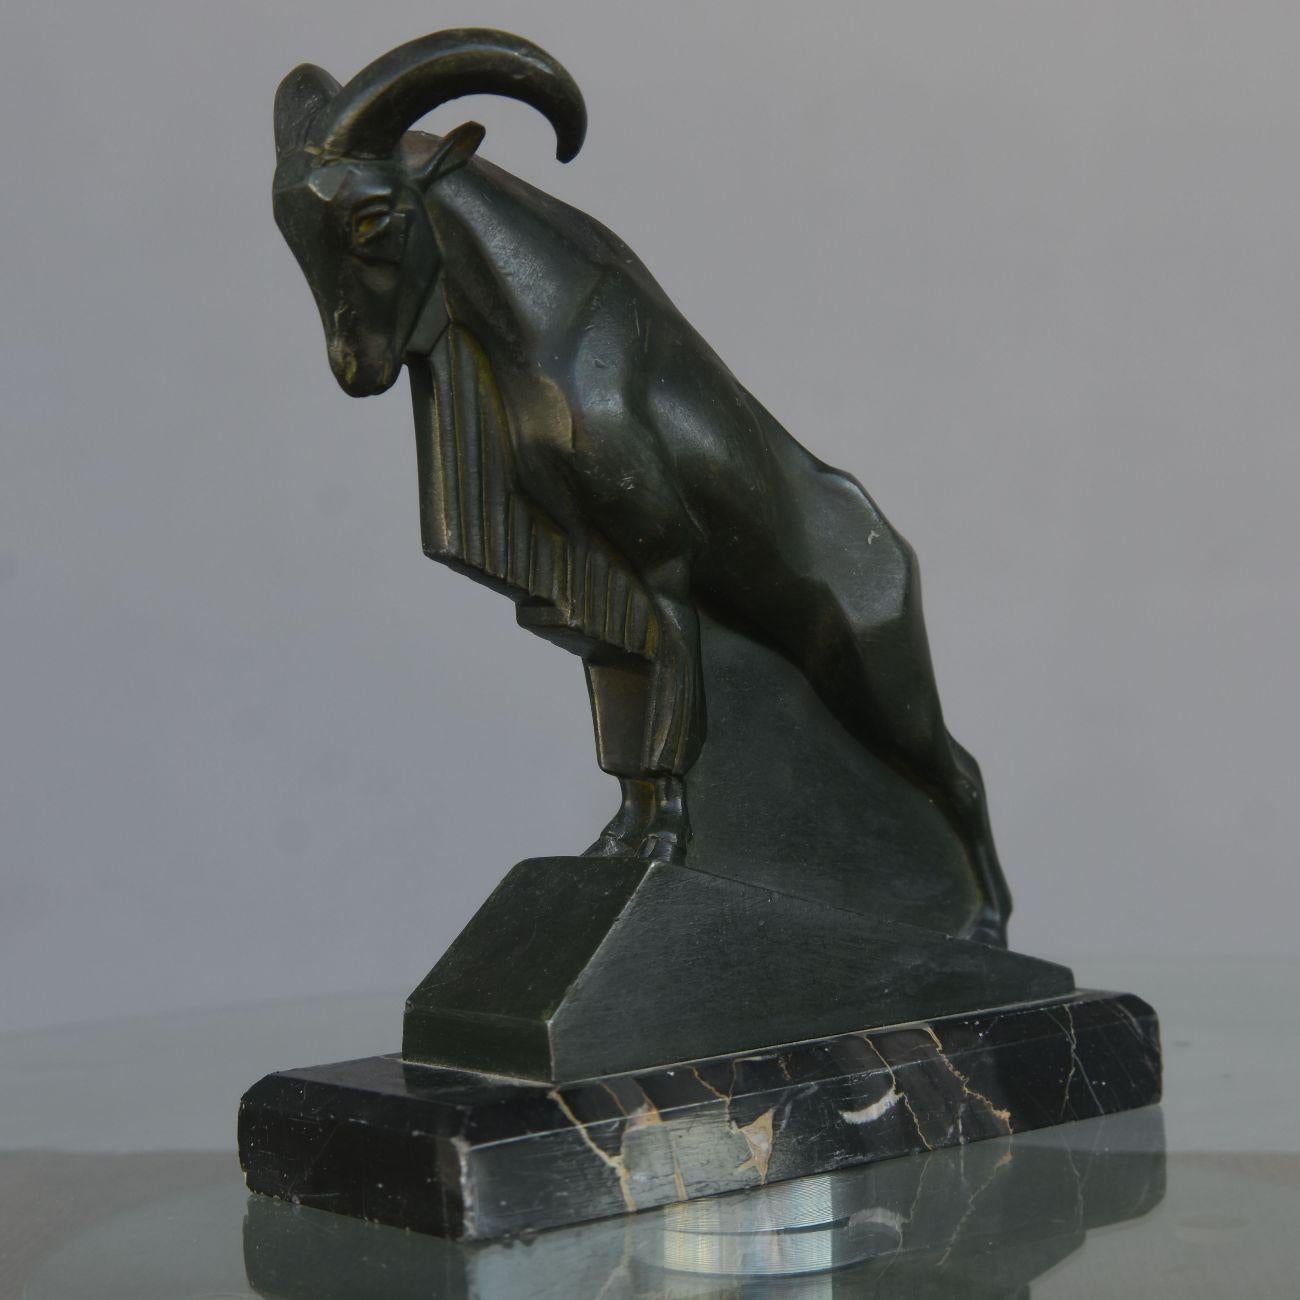 Mouflon in spelter patinated by Le Verrier on portor marble base.